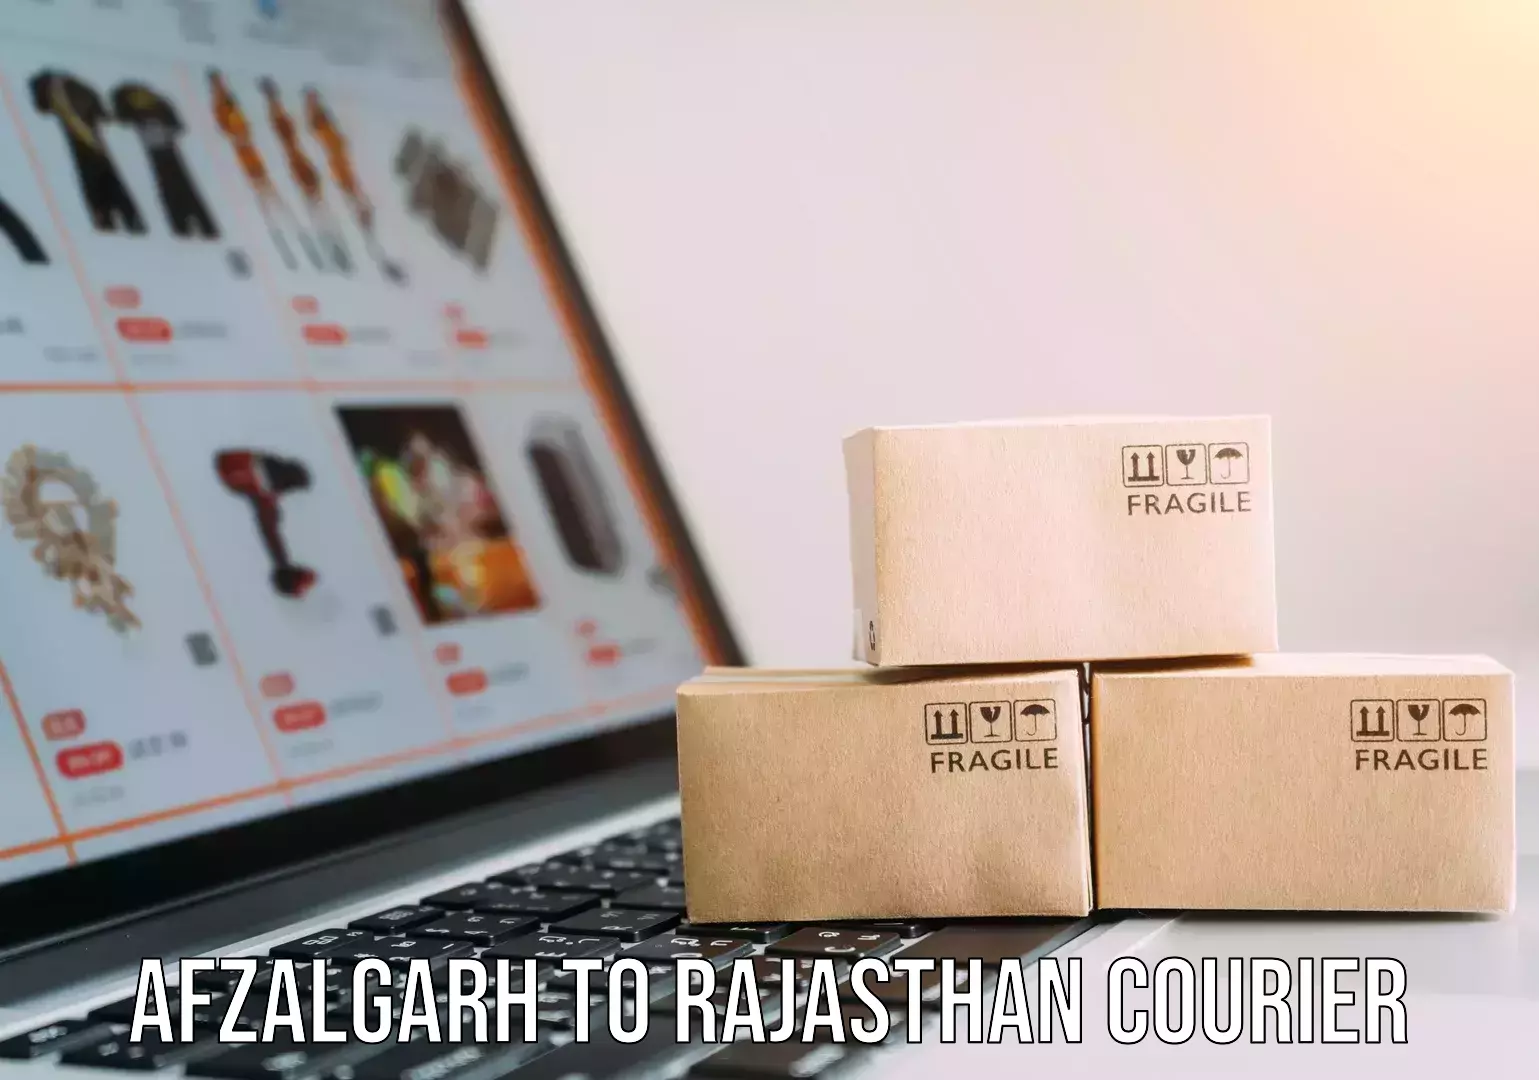 Automated shipping processes Afzalgarh to Rajasthan